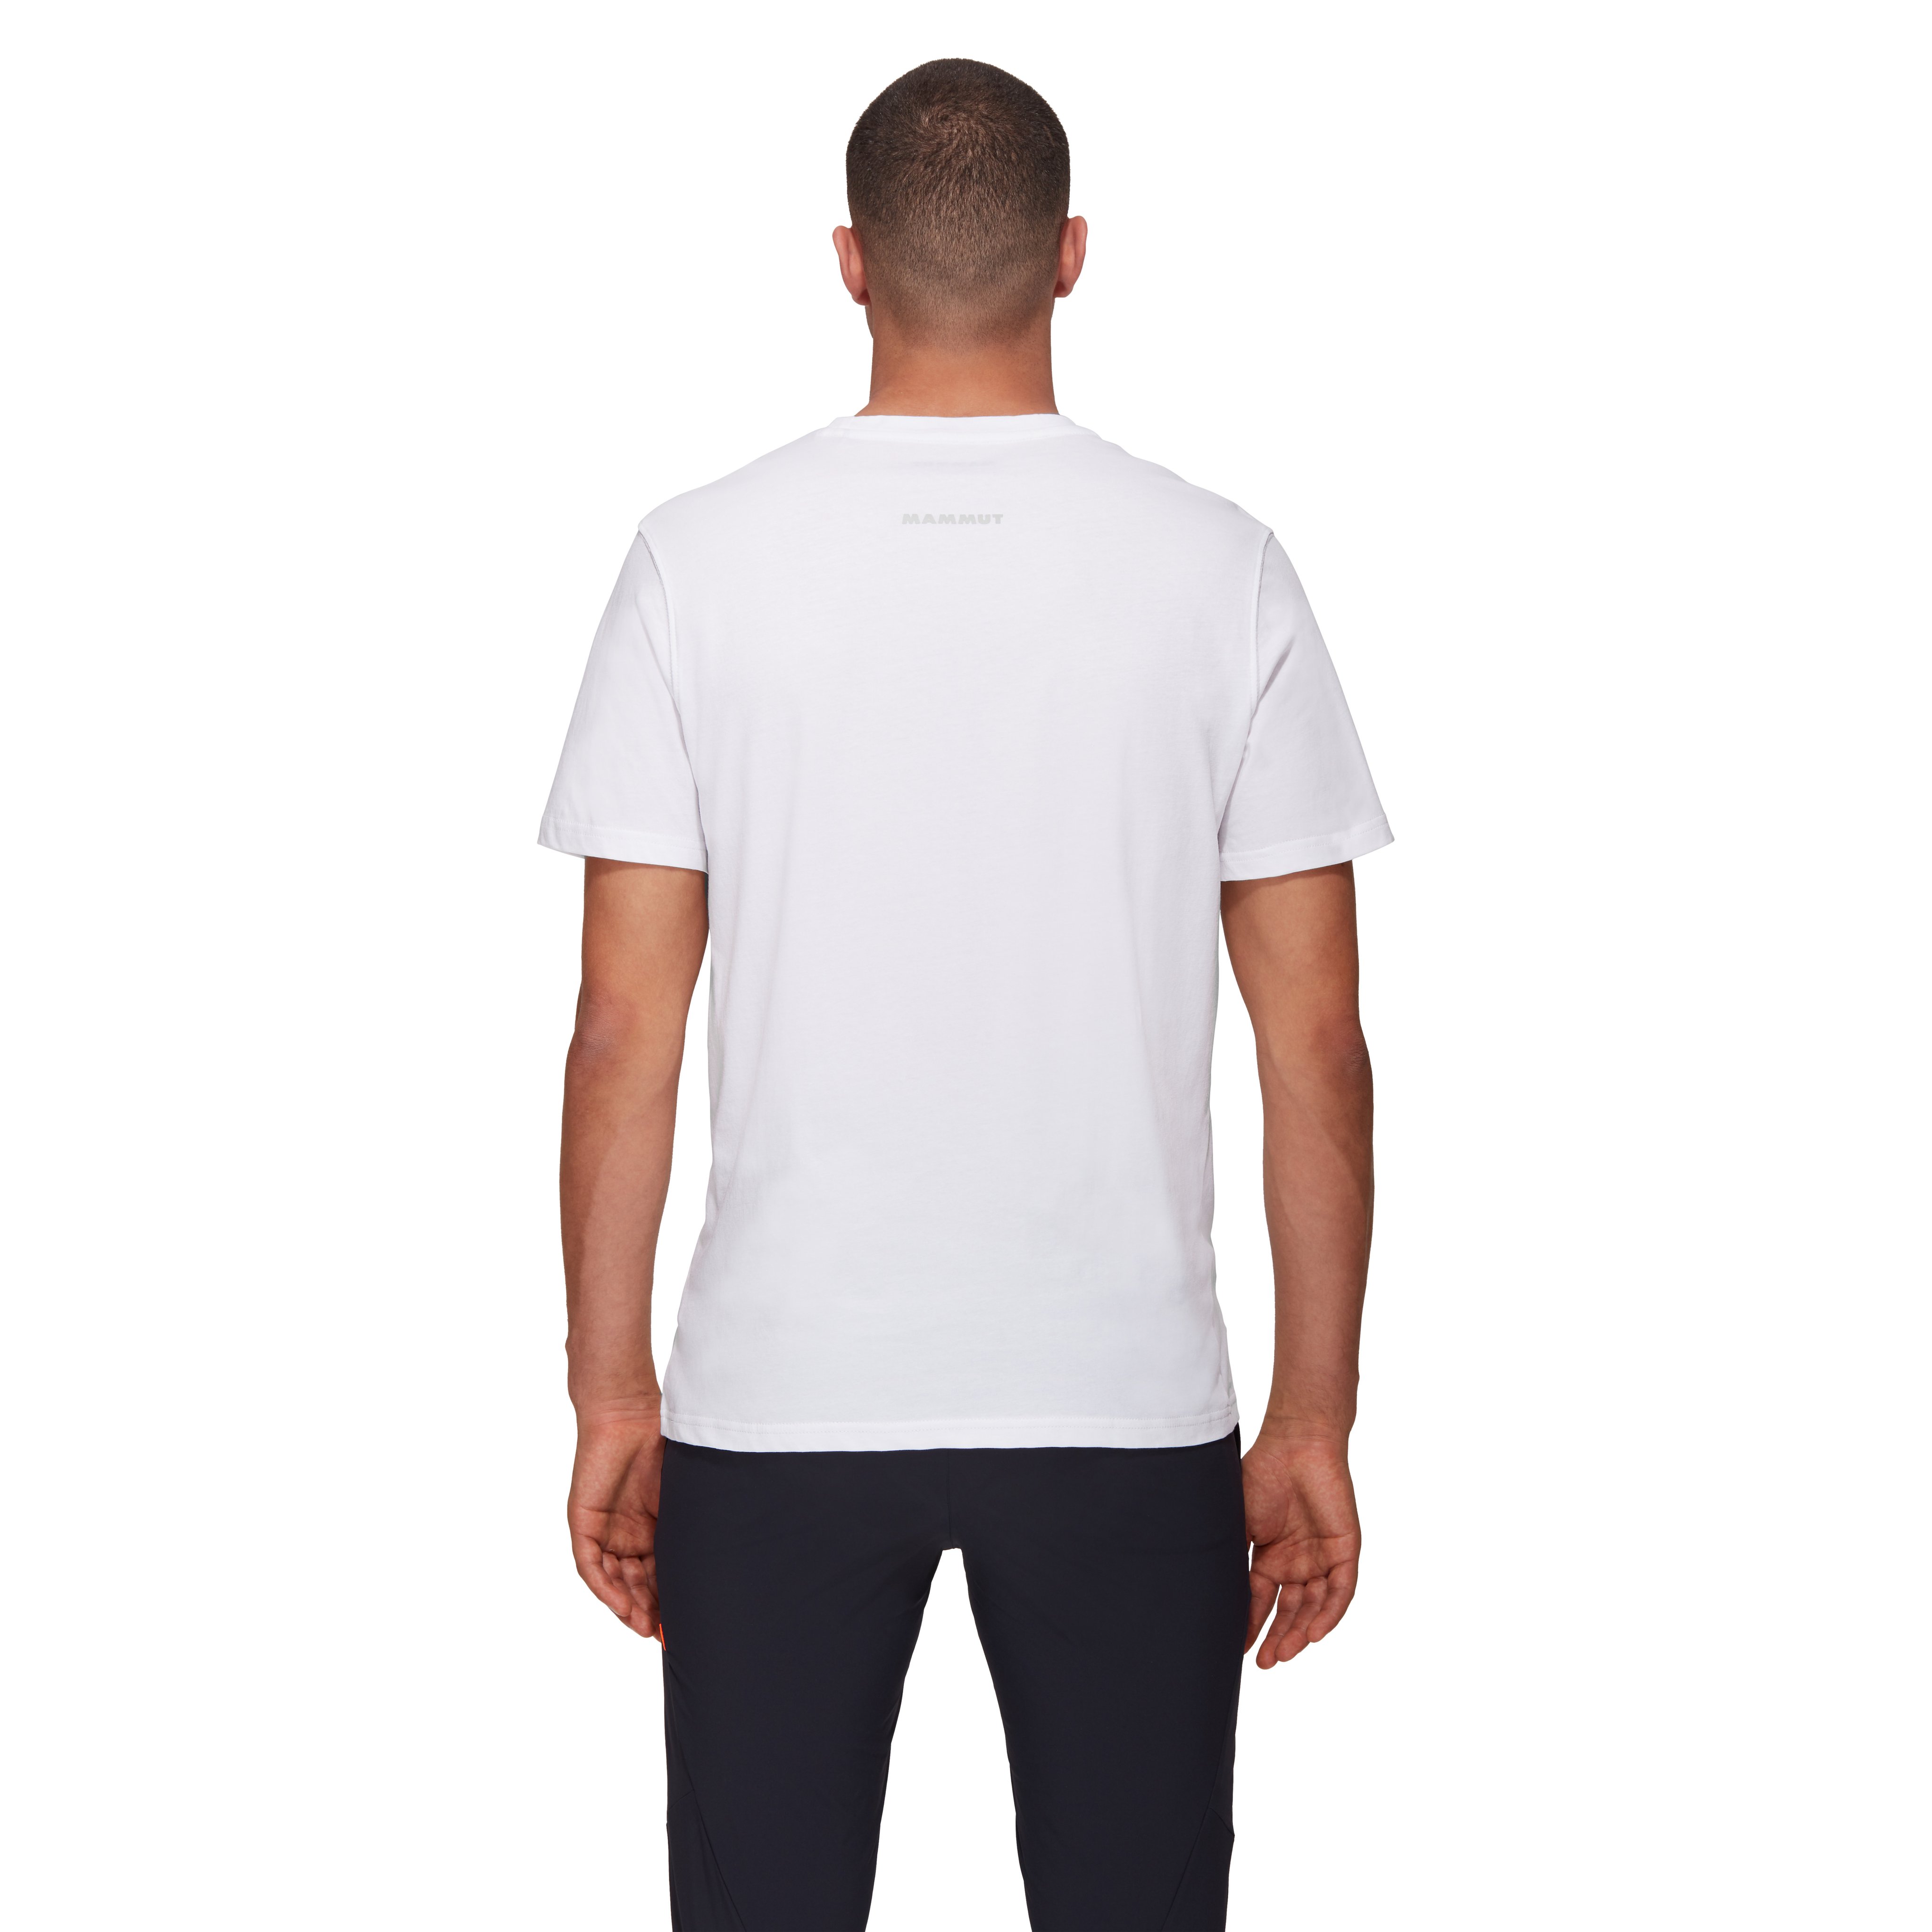 Mammut Essential T-Shirt product image